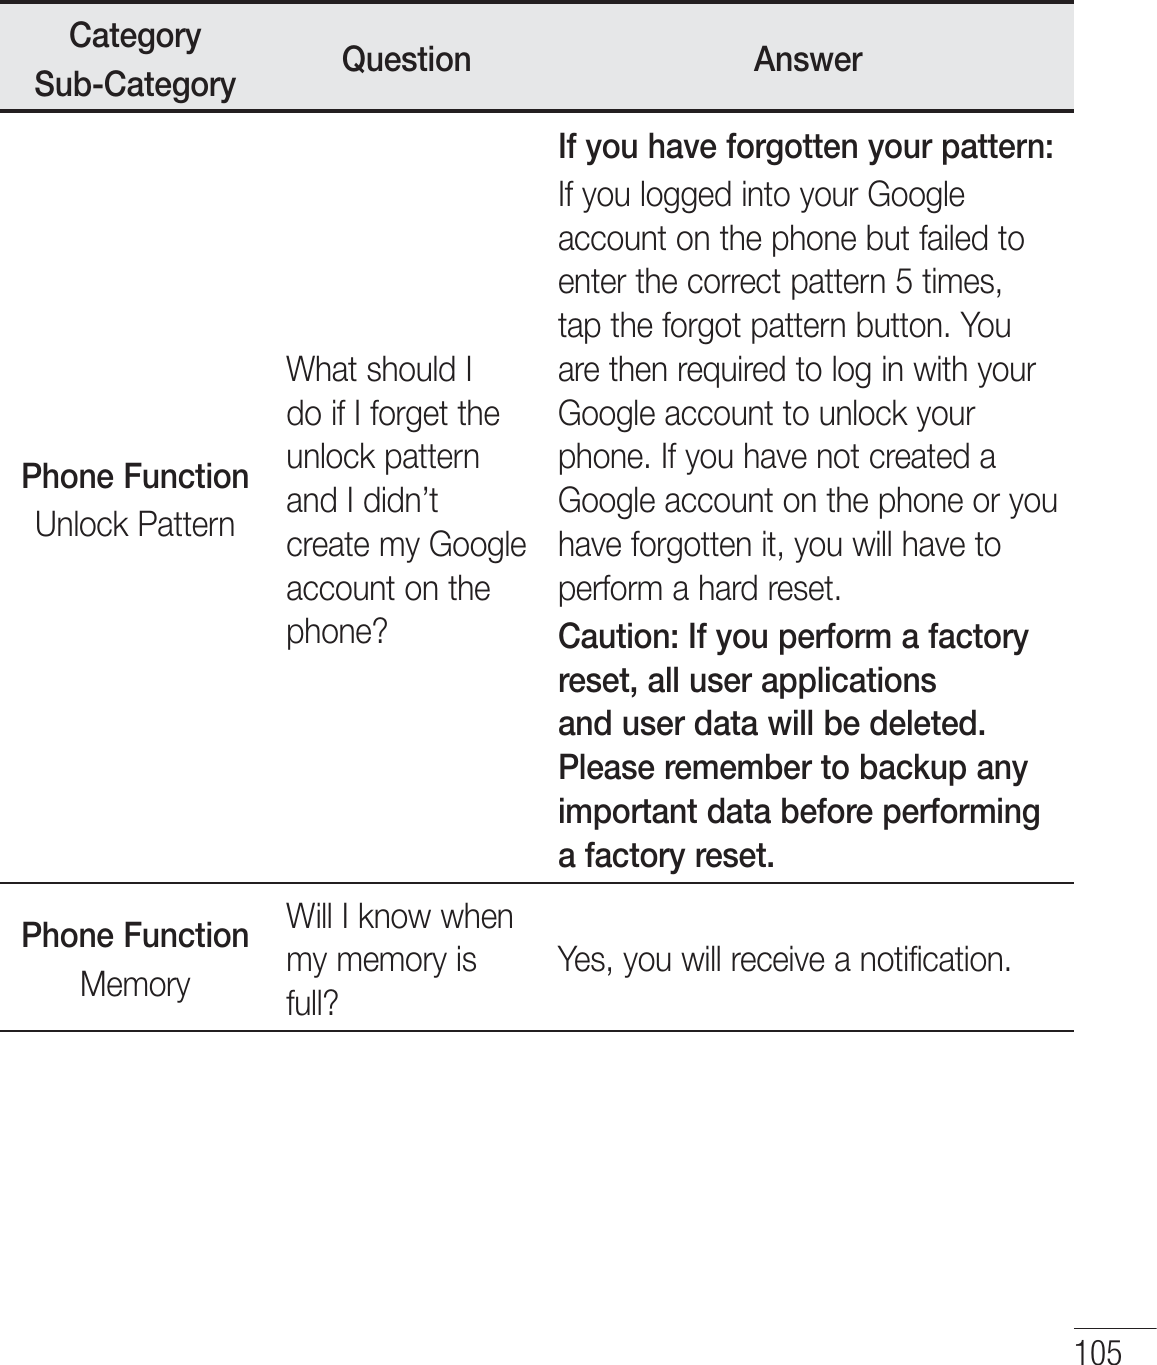 CategorySub-Category Question AnswerPhone FunctionUnlock PatternWhat should I do if I forget the unlock pattern and I didn’t create my Google account on the phone?If you have forgotten your pattern:If you logged into your Google account on the phone but failed to enter the correct pattern 5 times, tap the forgot pattern button. You are then required to log in with your Google account to unlock your phone. If you have not created a Google account on the phone or you have forgotten it, you will have to perform a hard reset.Caution: If you perform a factory reset, all user applications and user data will be deleted. Please remember to backup any important data before performing a factory reset.Phone FunctionMemoryWill I know when my memory is full?Yes, you will receive a notification.